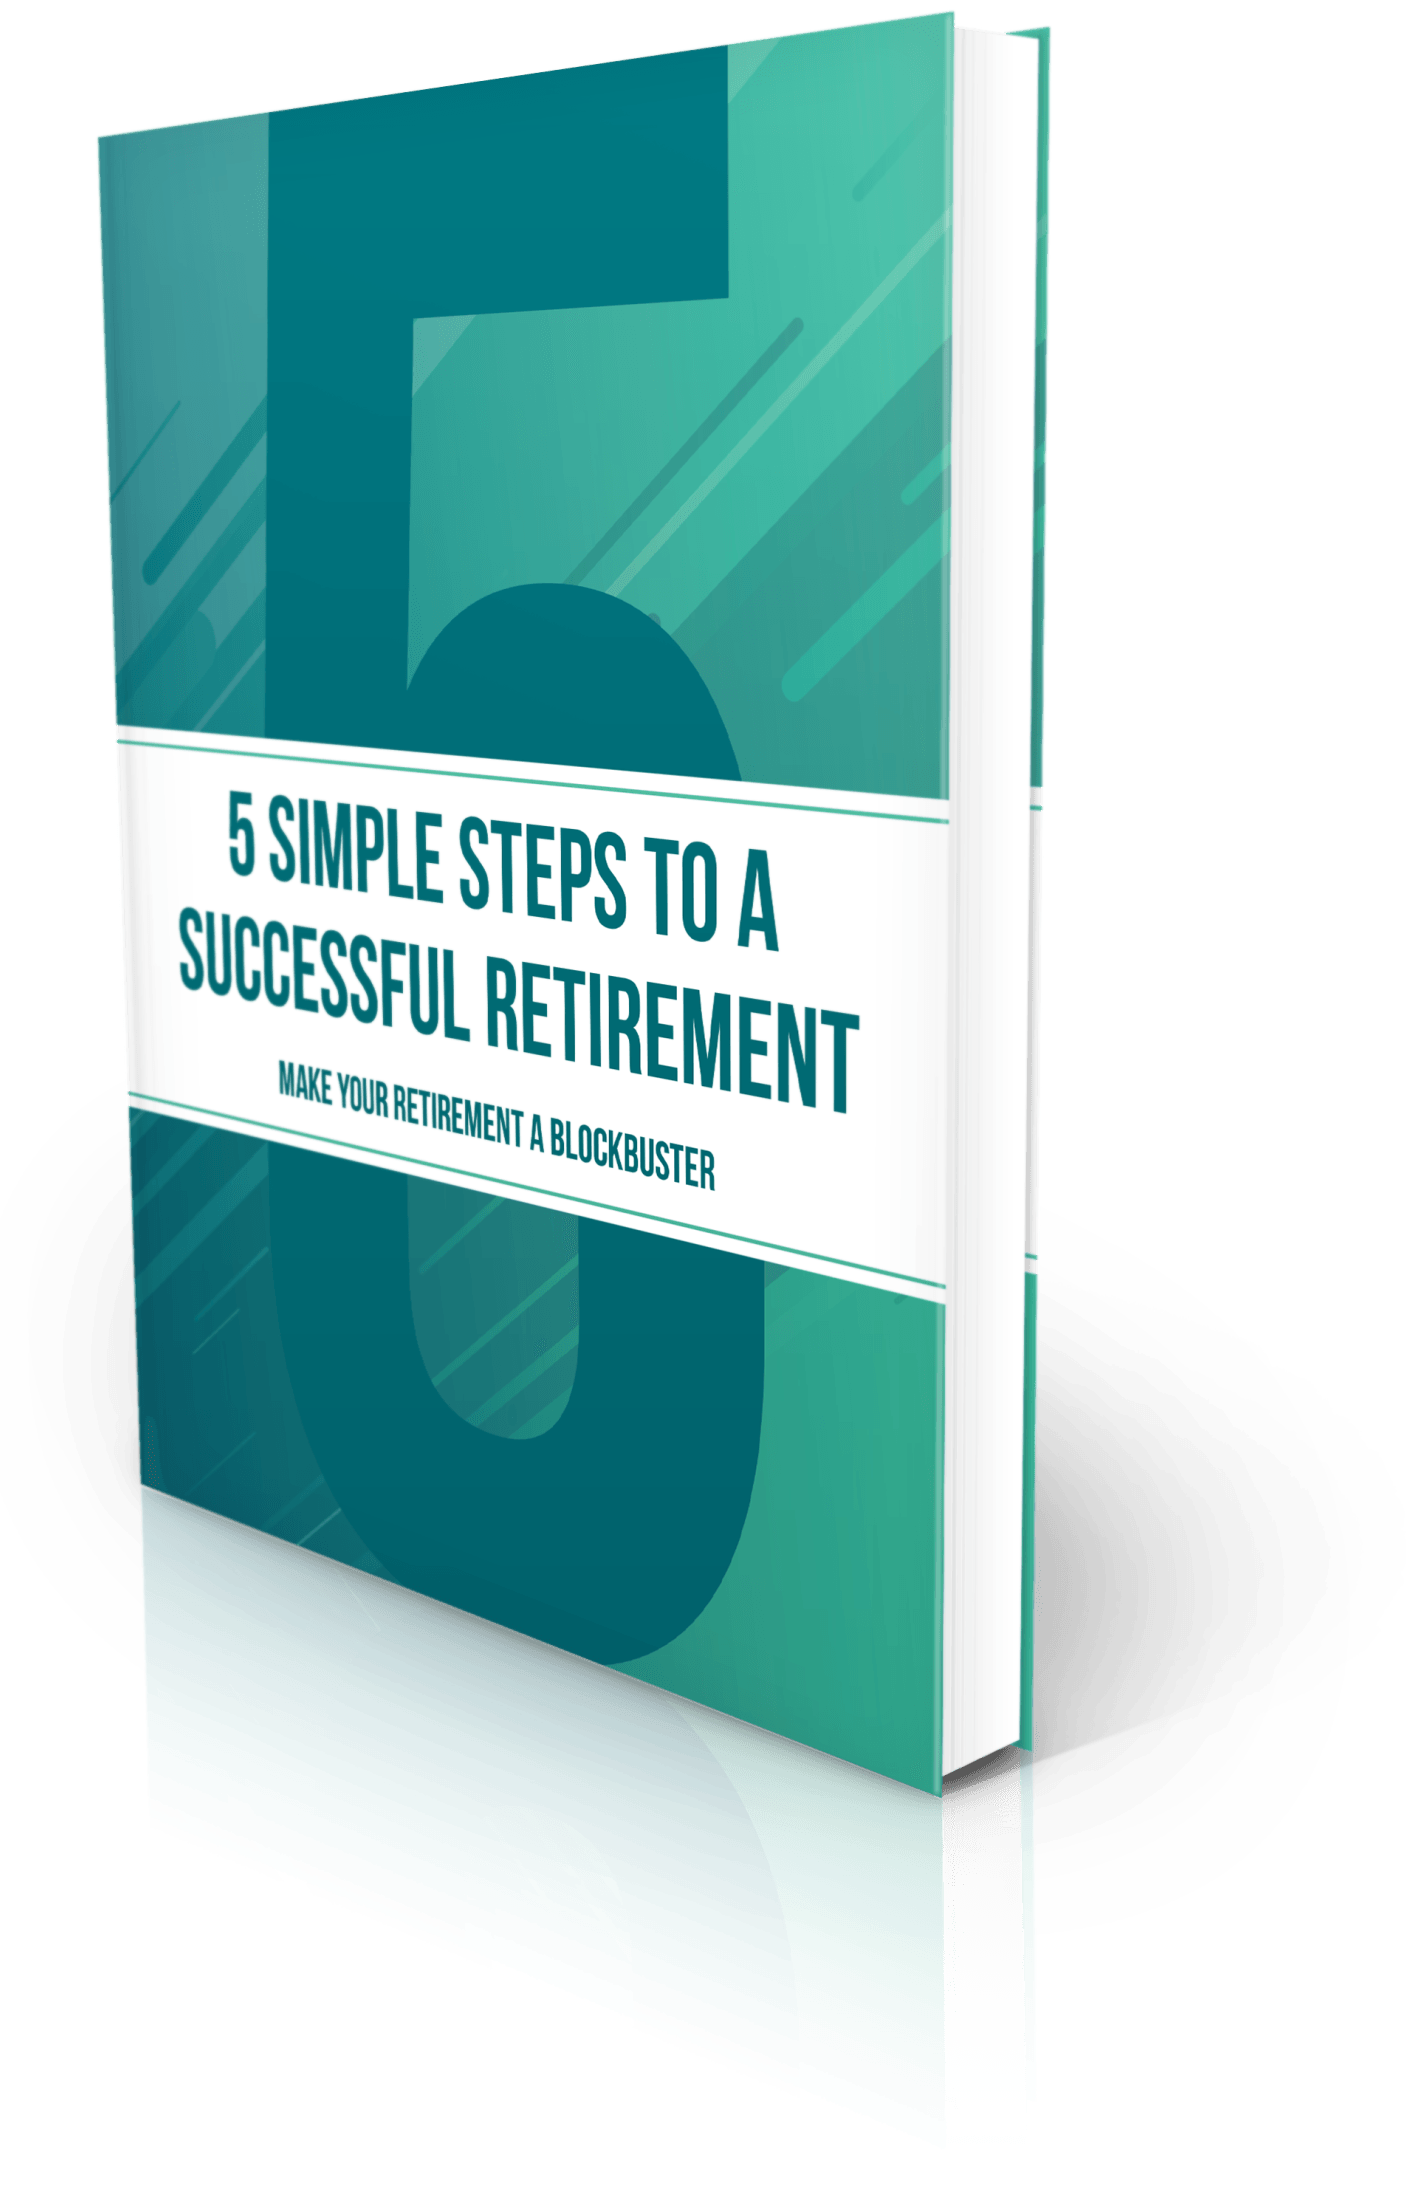 5 Simple Steps To A Successful Retirement